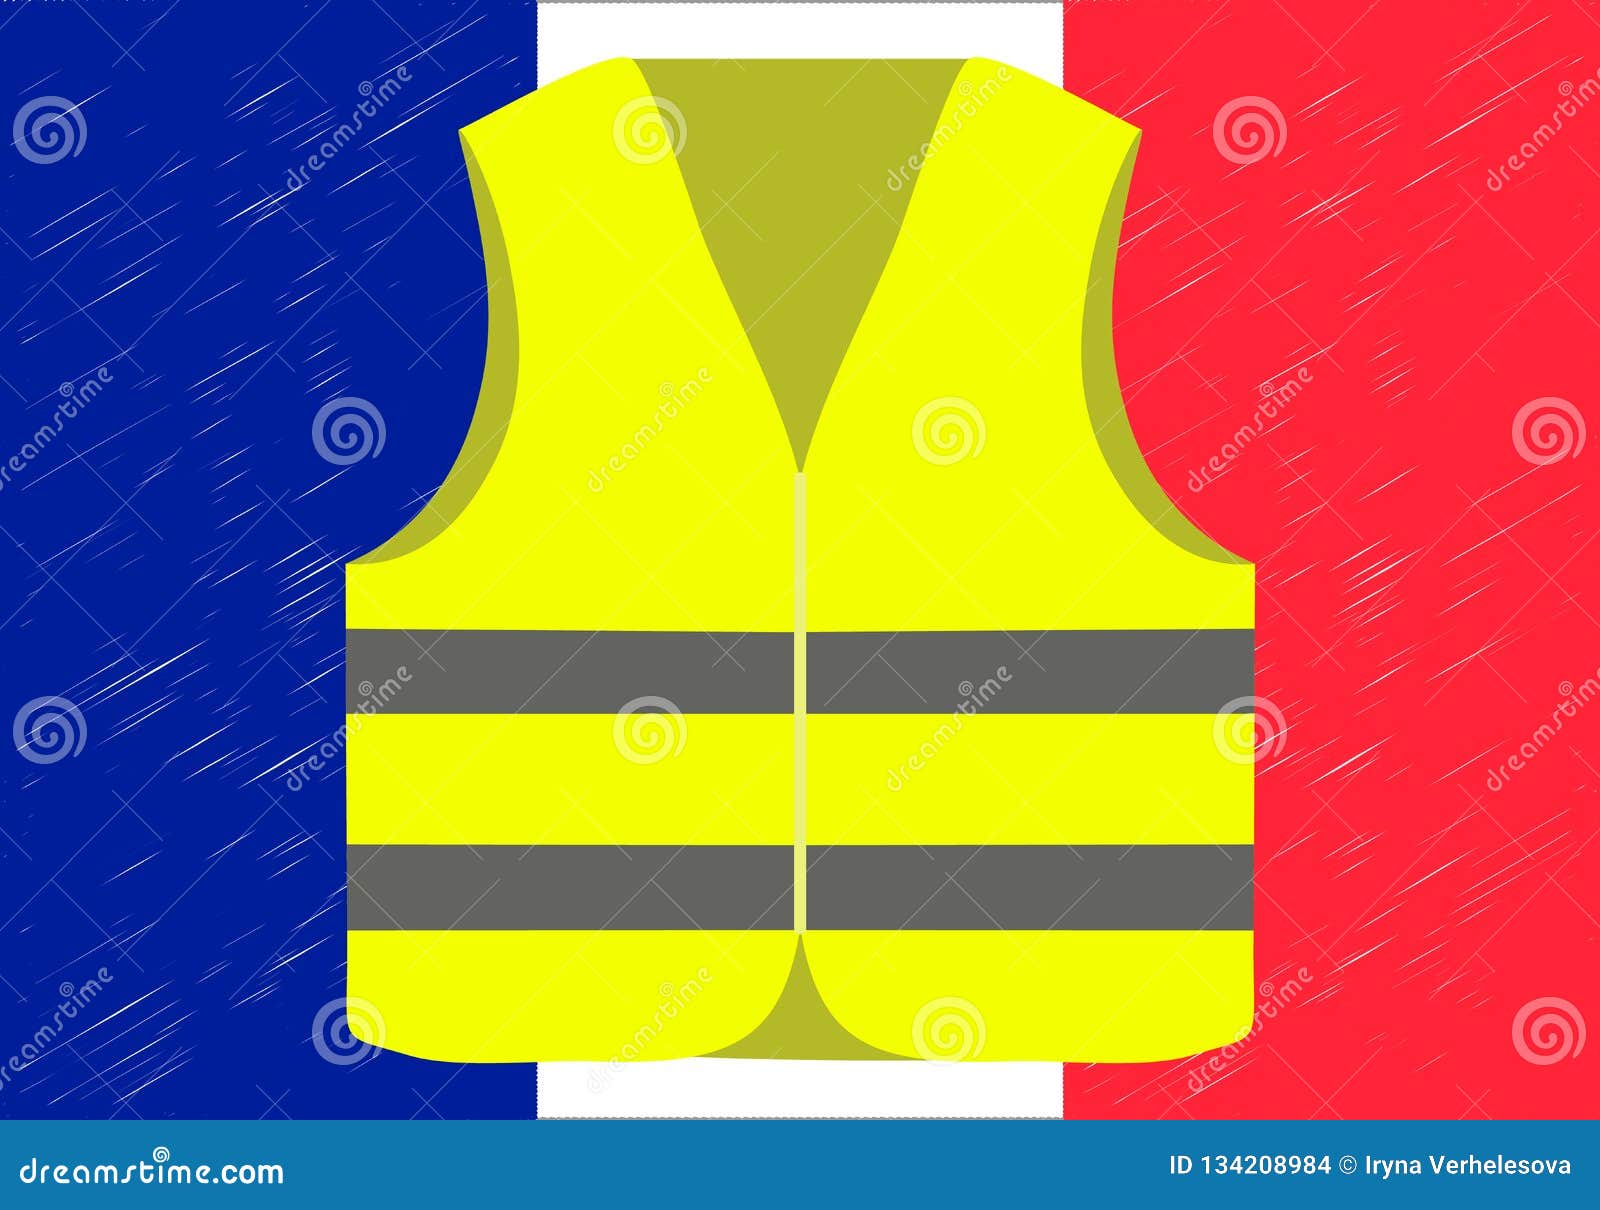 Protests of Yellow Vests in France. Suitable for News on Gilets Jaunes ...